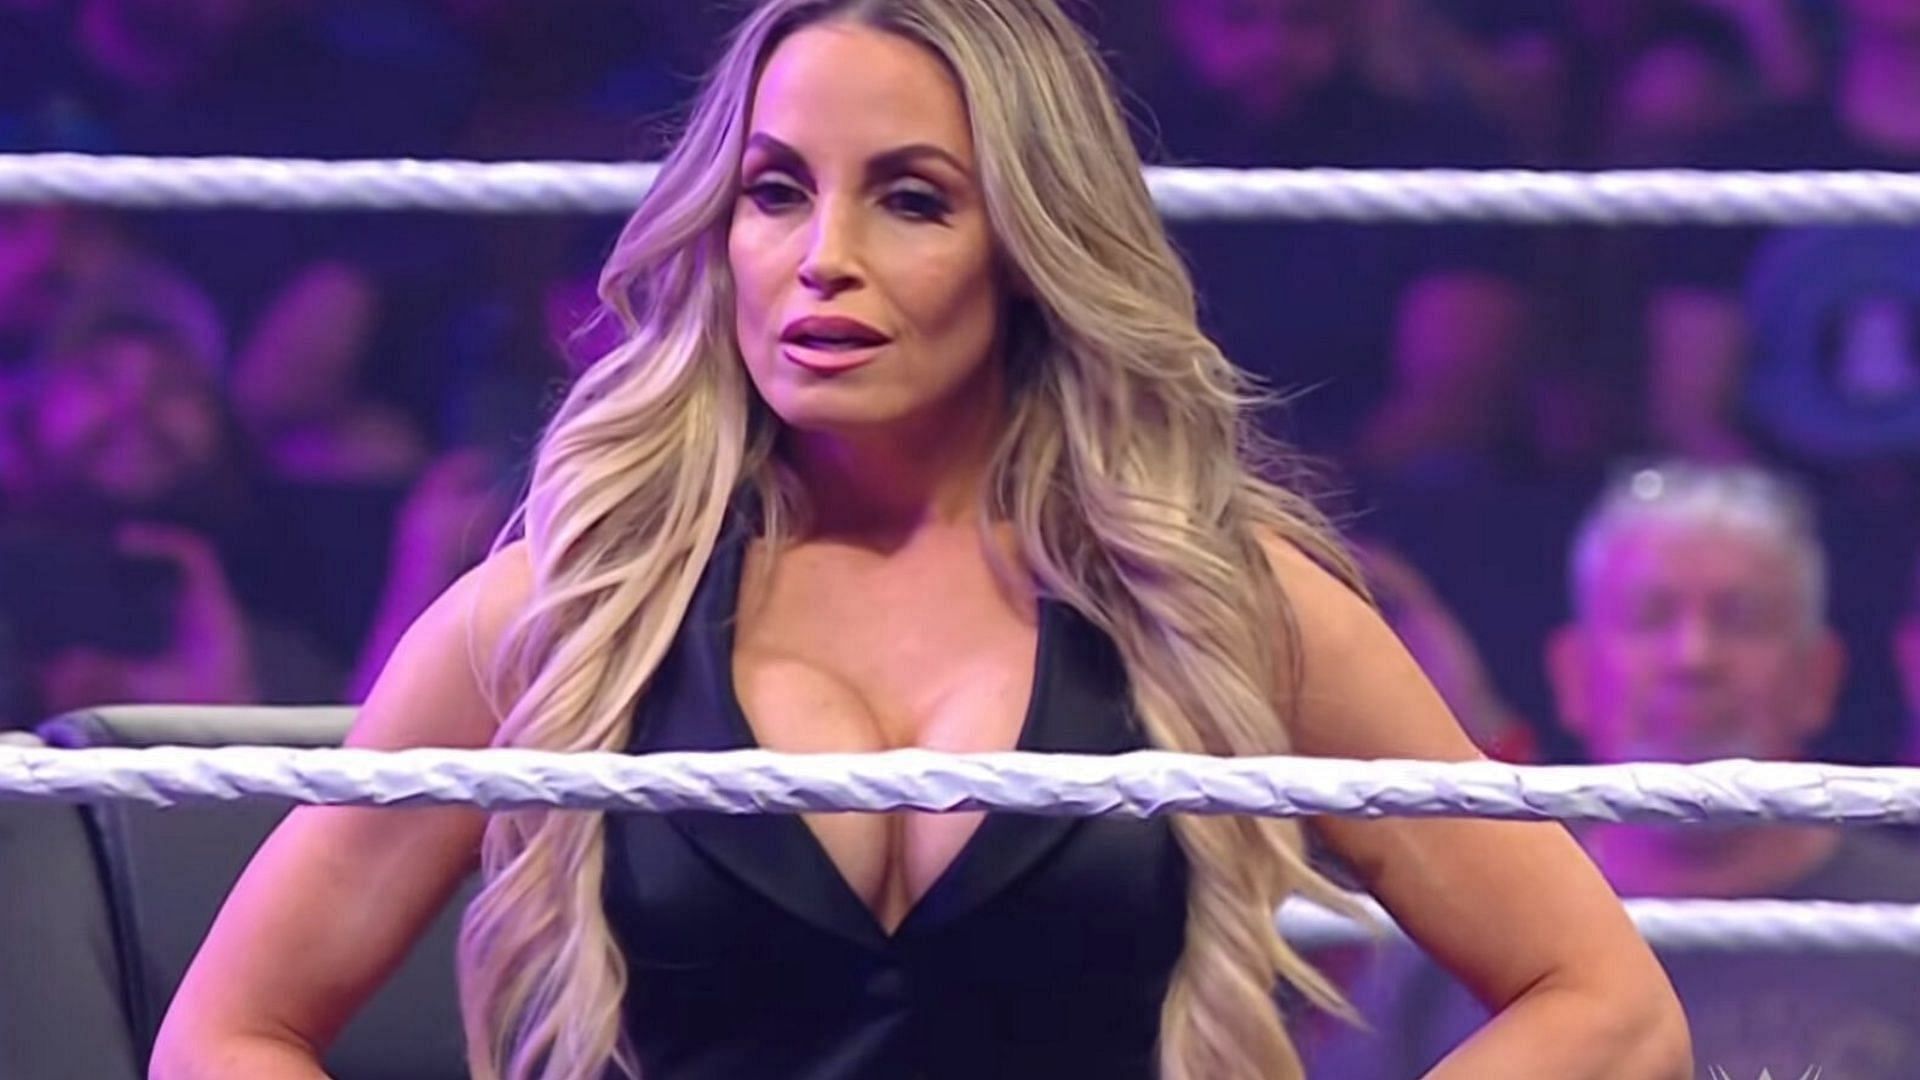 Trish Stratus was praised for her match at WWE Payback